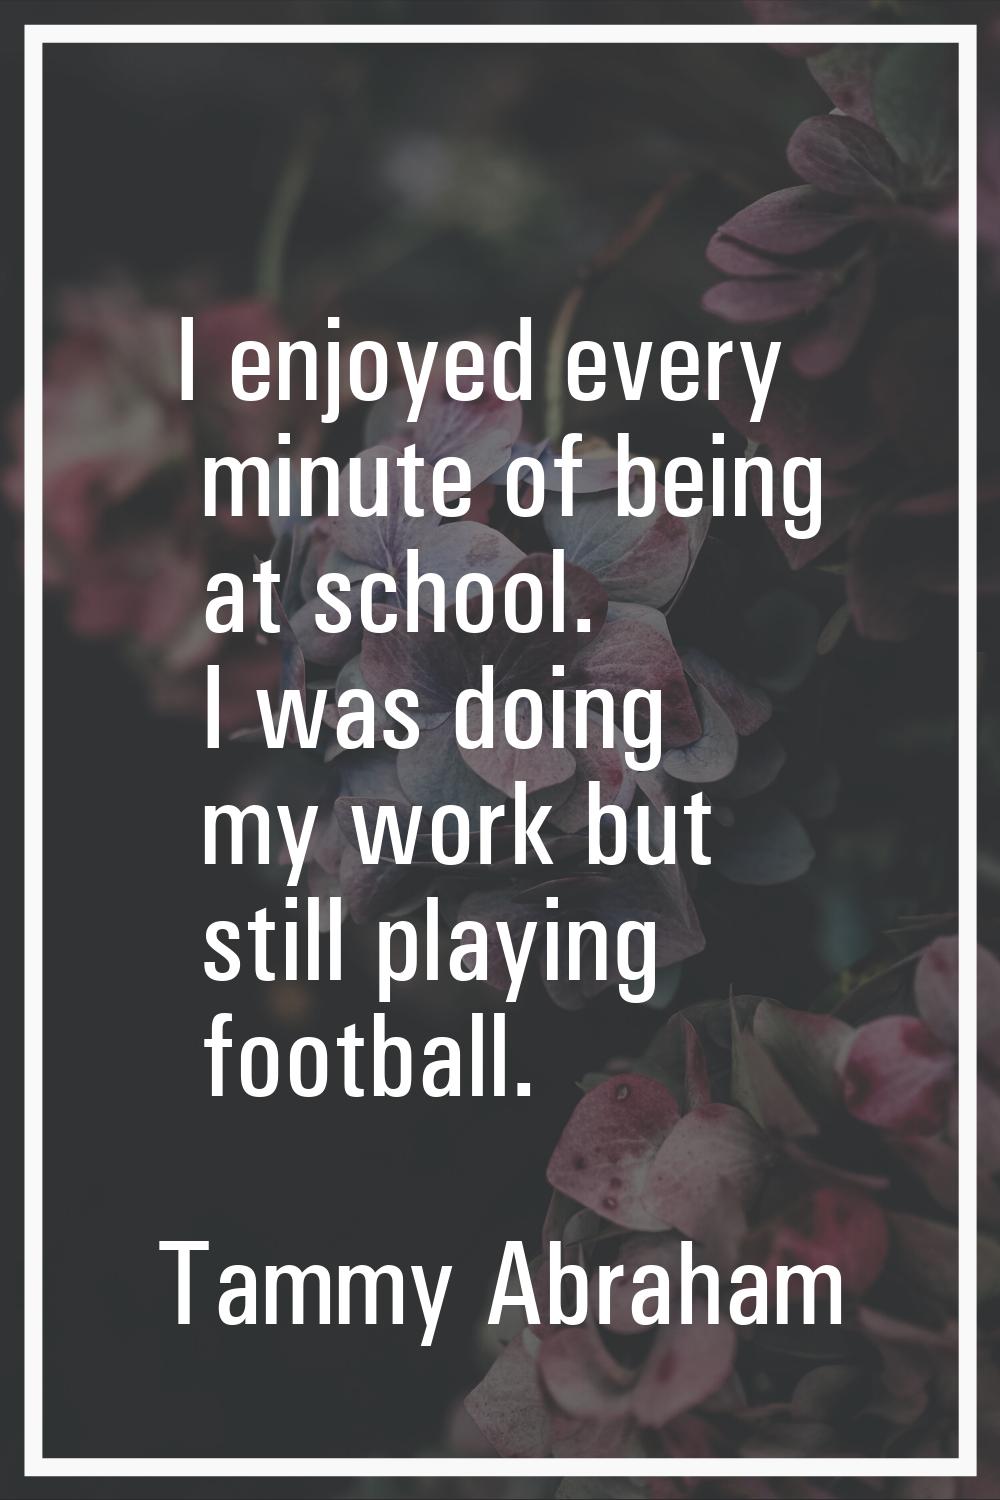 I enjoyed every minute of being at school. I was doing my work but still playing football.